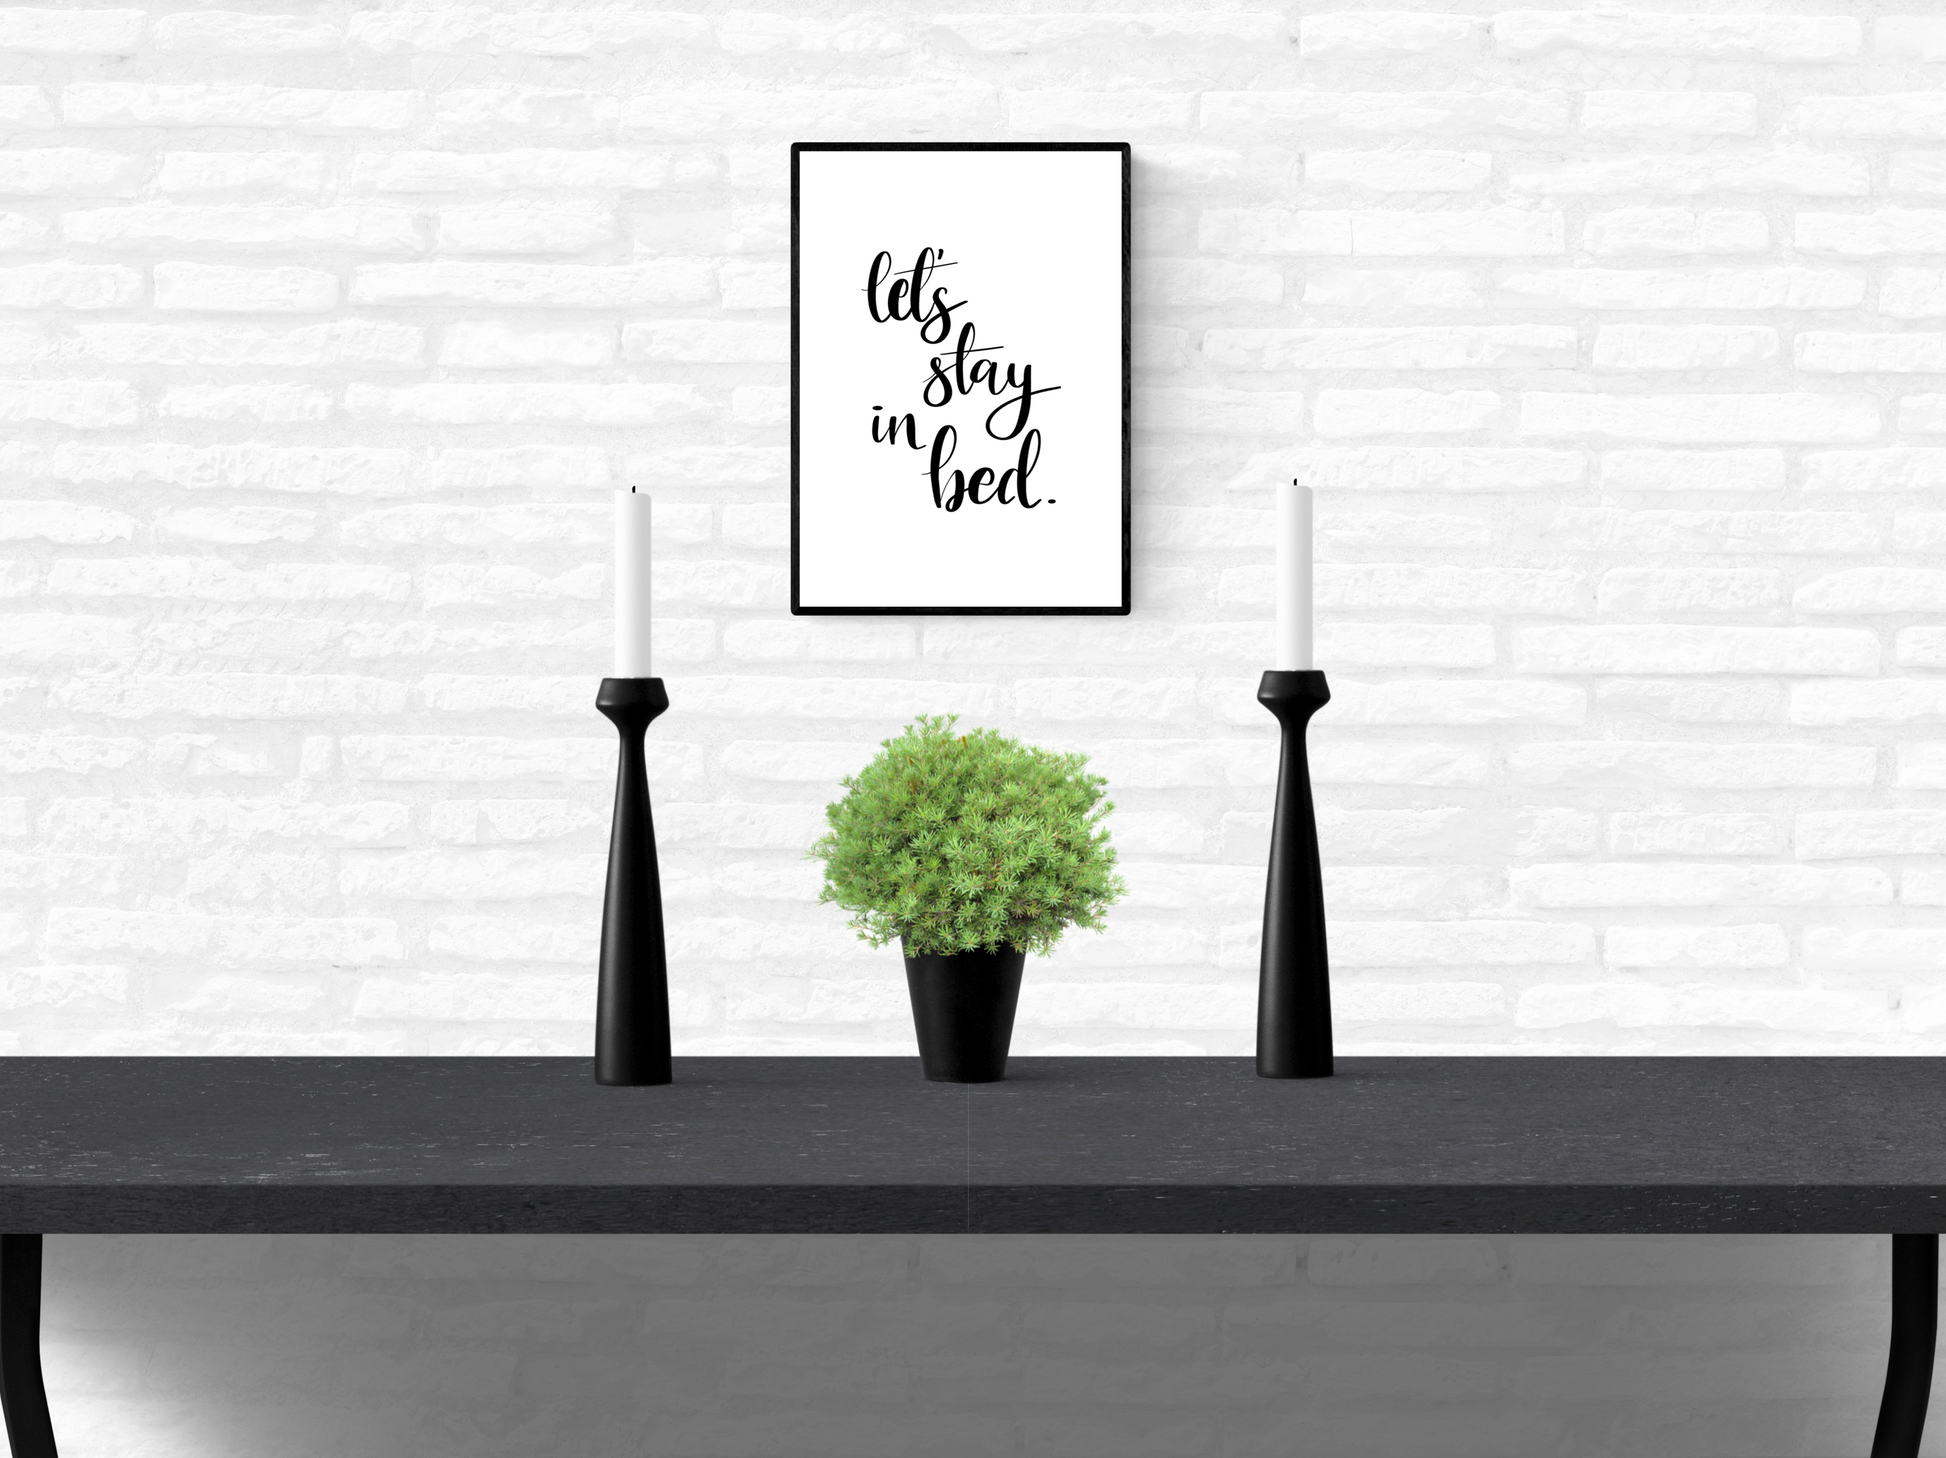 Framed wall quote typography print with the words “let’s stay in bed”, mounted on a home’s interior white brick wall above a table